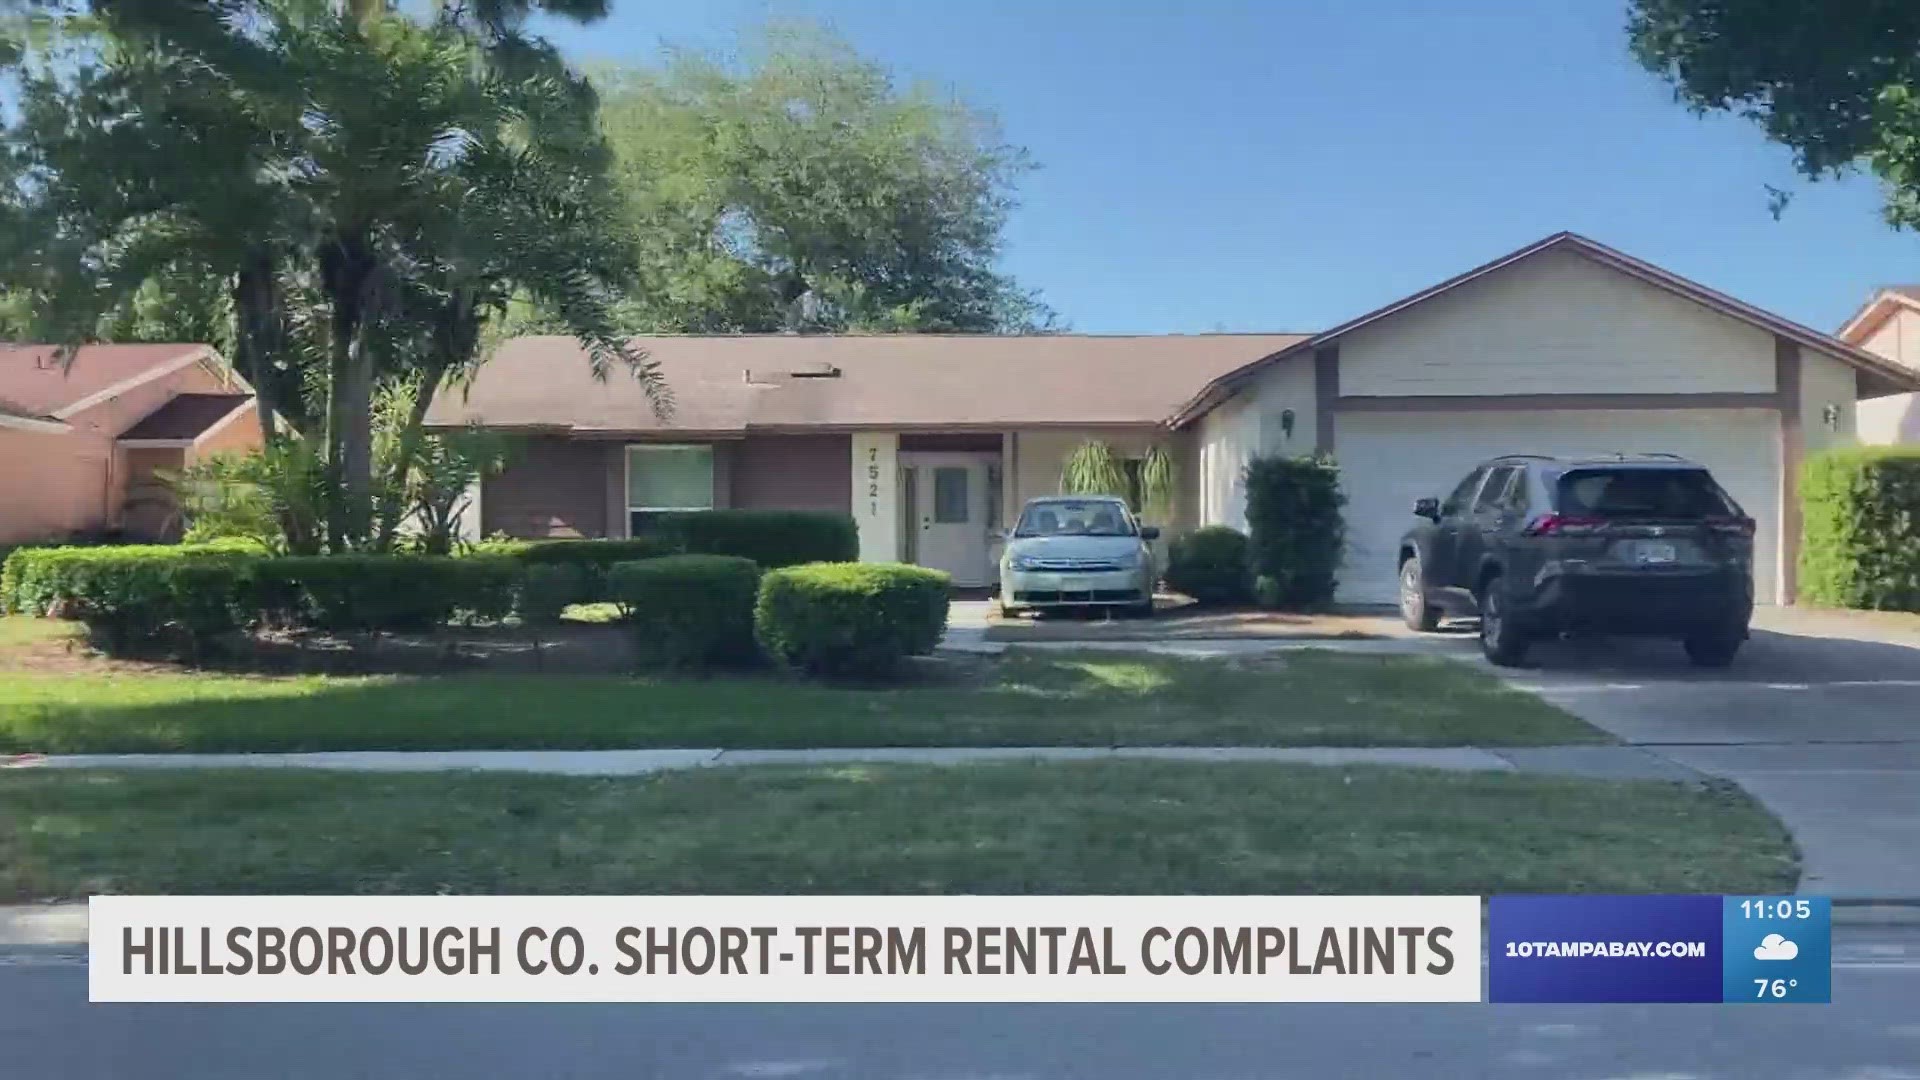 In a deed-restricted neighborhood in Hillsborough County, some residents say they're out of options to get neighbors to follow county code and deed restrictions.